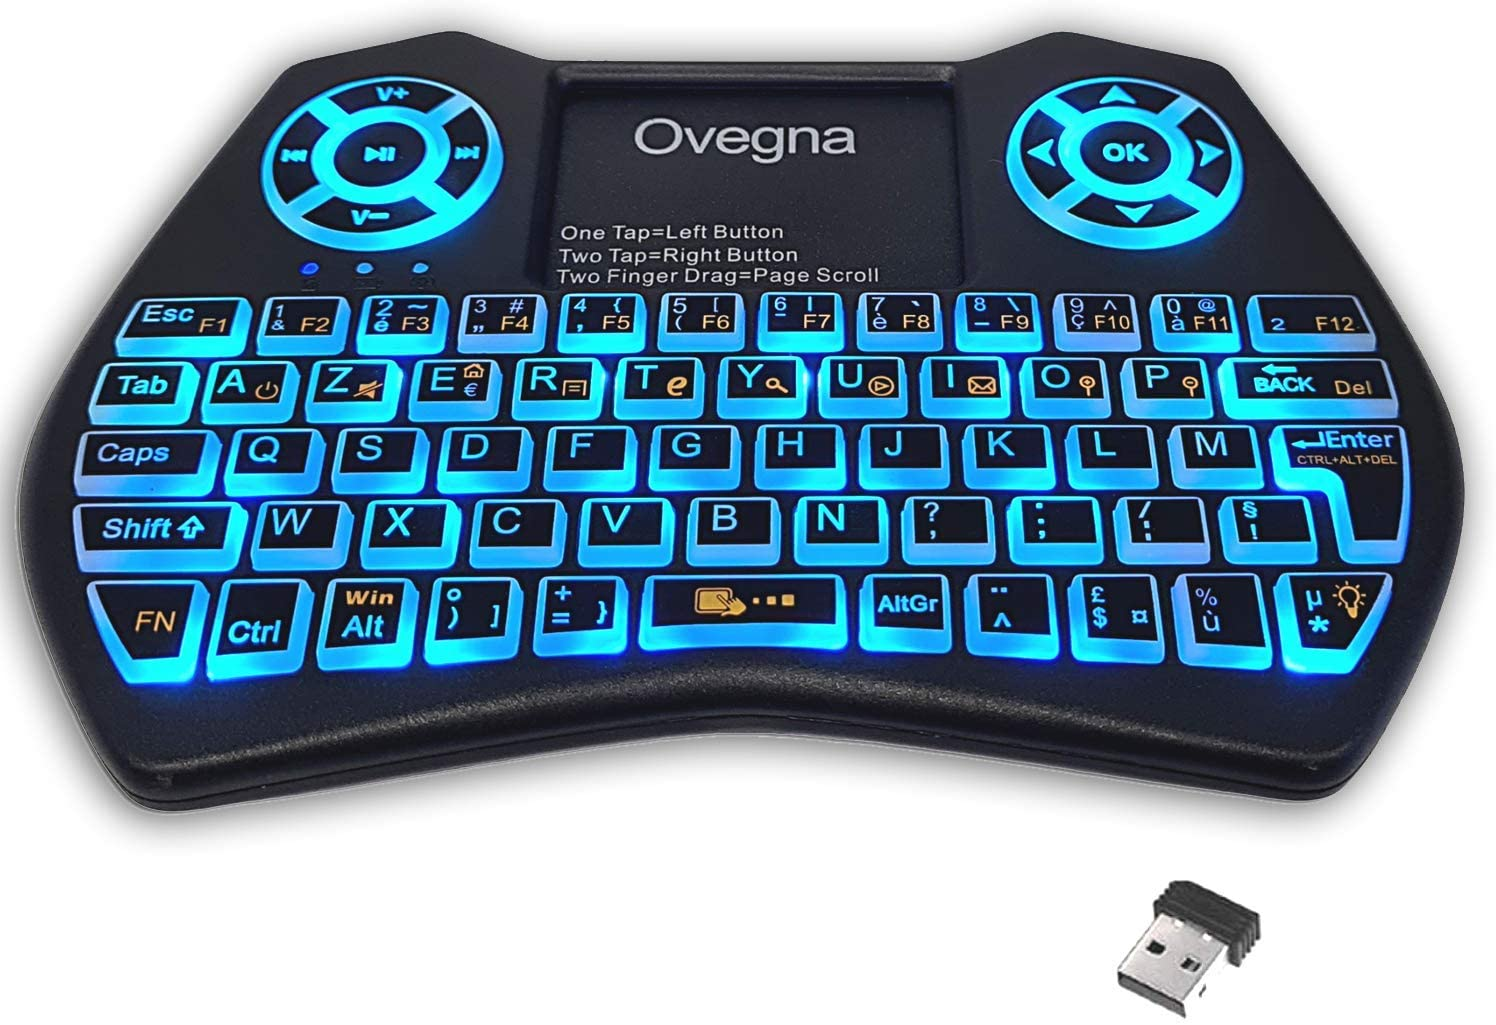 ovegna-i9-wireless-mini-keyboard-azerty-2-4ghz-wireless-touchpad-battery-rgb-backlight-for-smart-tv-pc-mini-pc-mac-raspberry-pi-2-3-4-consoles-laptop-and-android-box--88